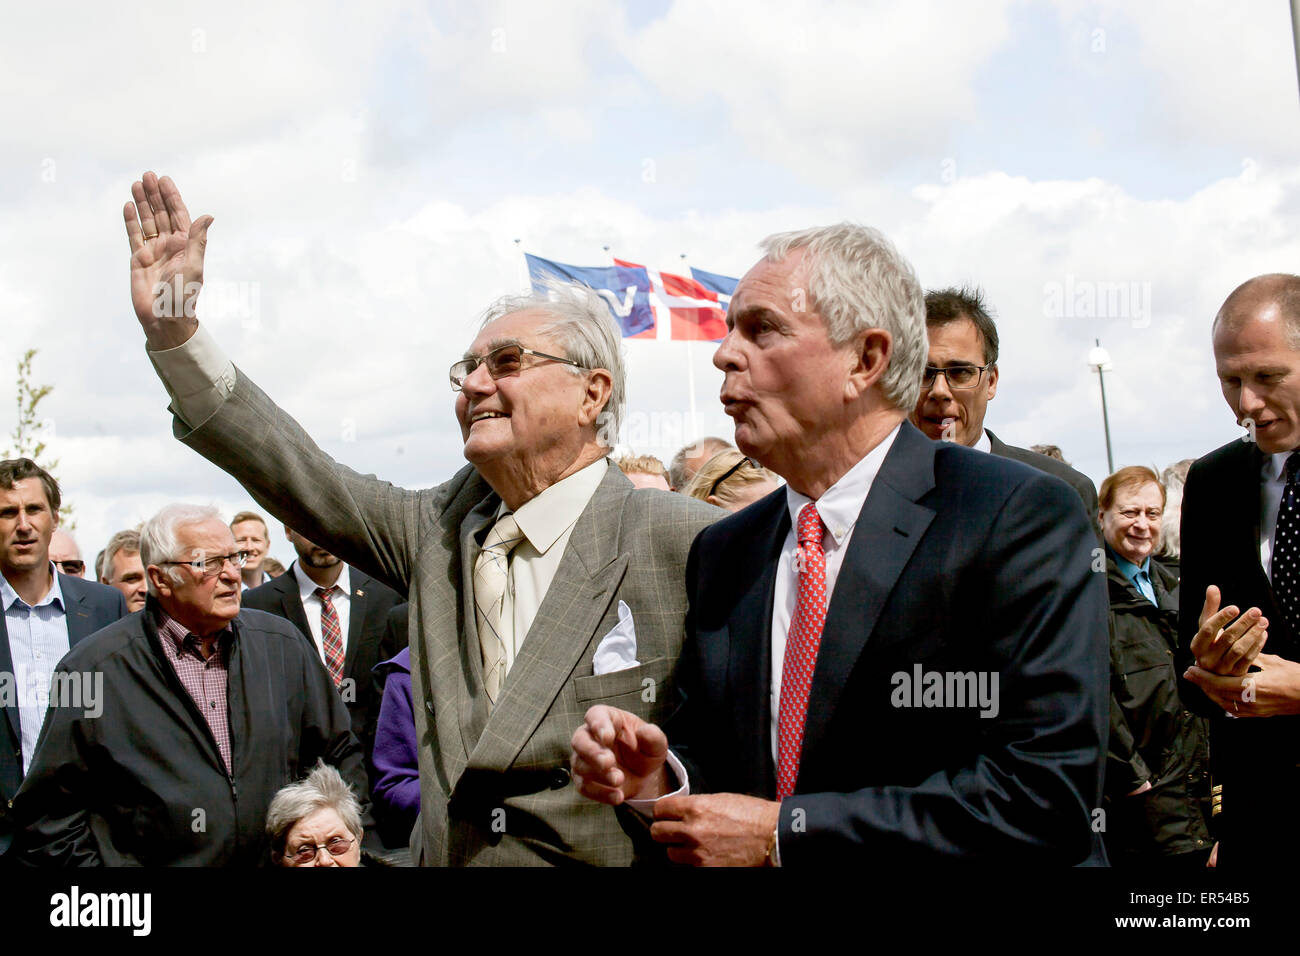 Hedehusene, Denmark, May 27th, 2015: Prince Concort Henrik (2nd, R) waves to bystanders as he arrives to DSV’s new head quarter in Hedehuene near Copenhagen. The Prince Concort reveiled his new sculpture, “The Creative Hand”, which stands near the entrence to DSV. At the photo he is followed by DSV chairman, Kurt Larsen (1st, R) Credit:  OJPHOTOS/Alamy Live News Stock Photo